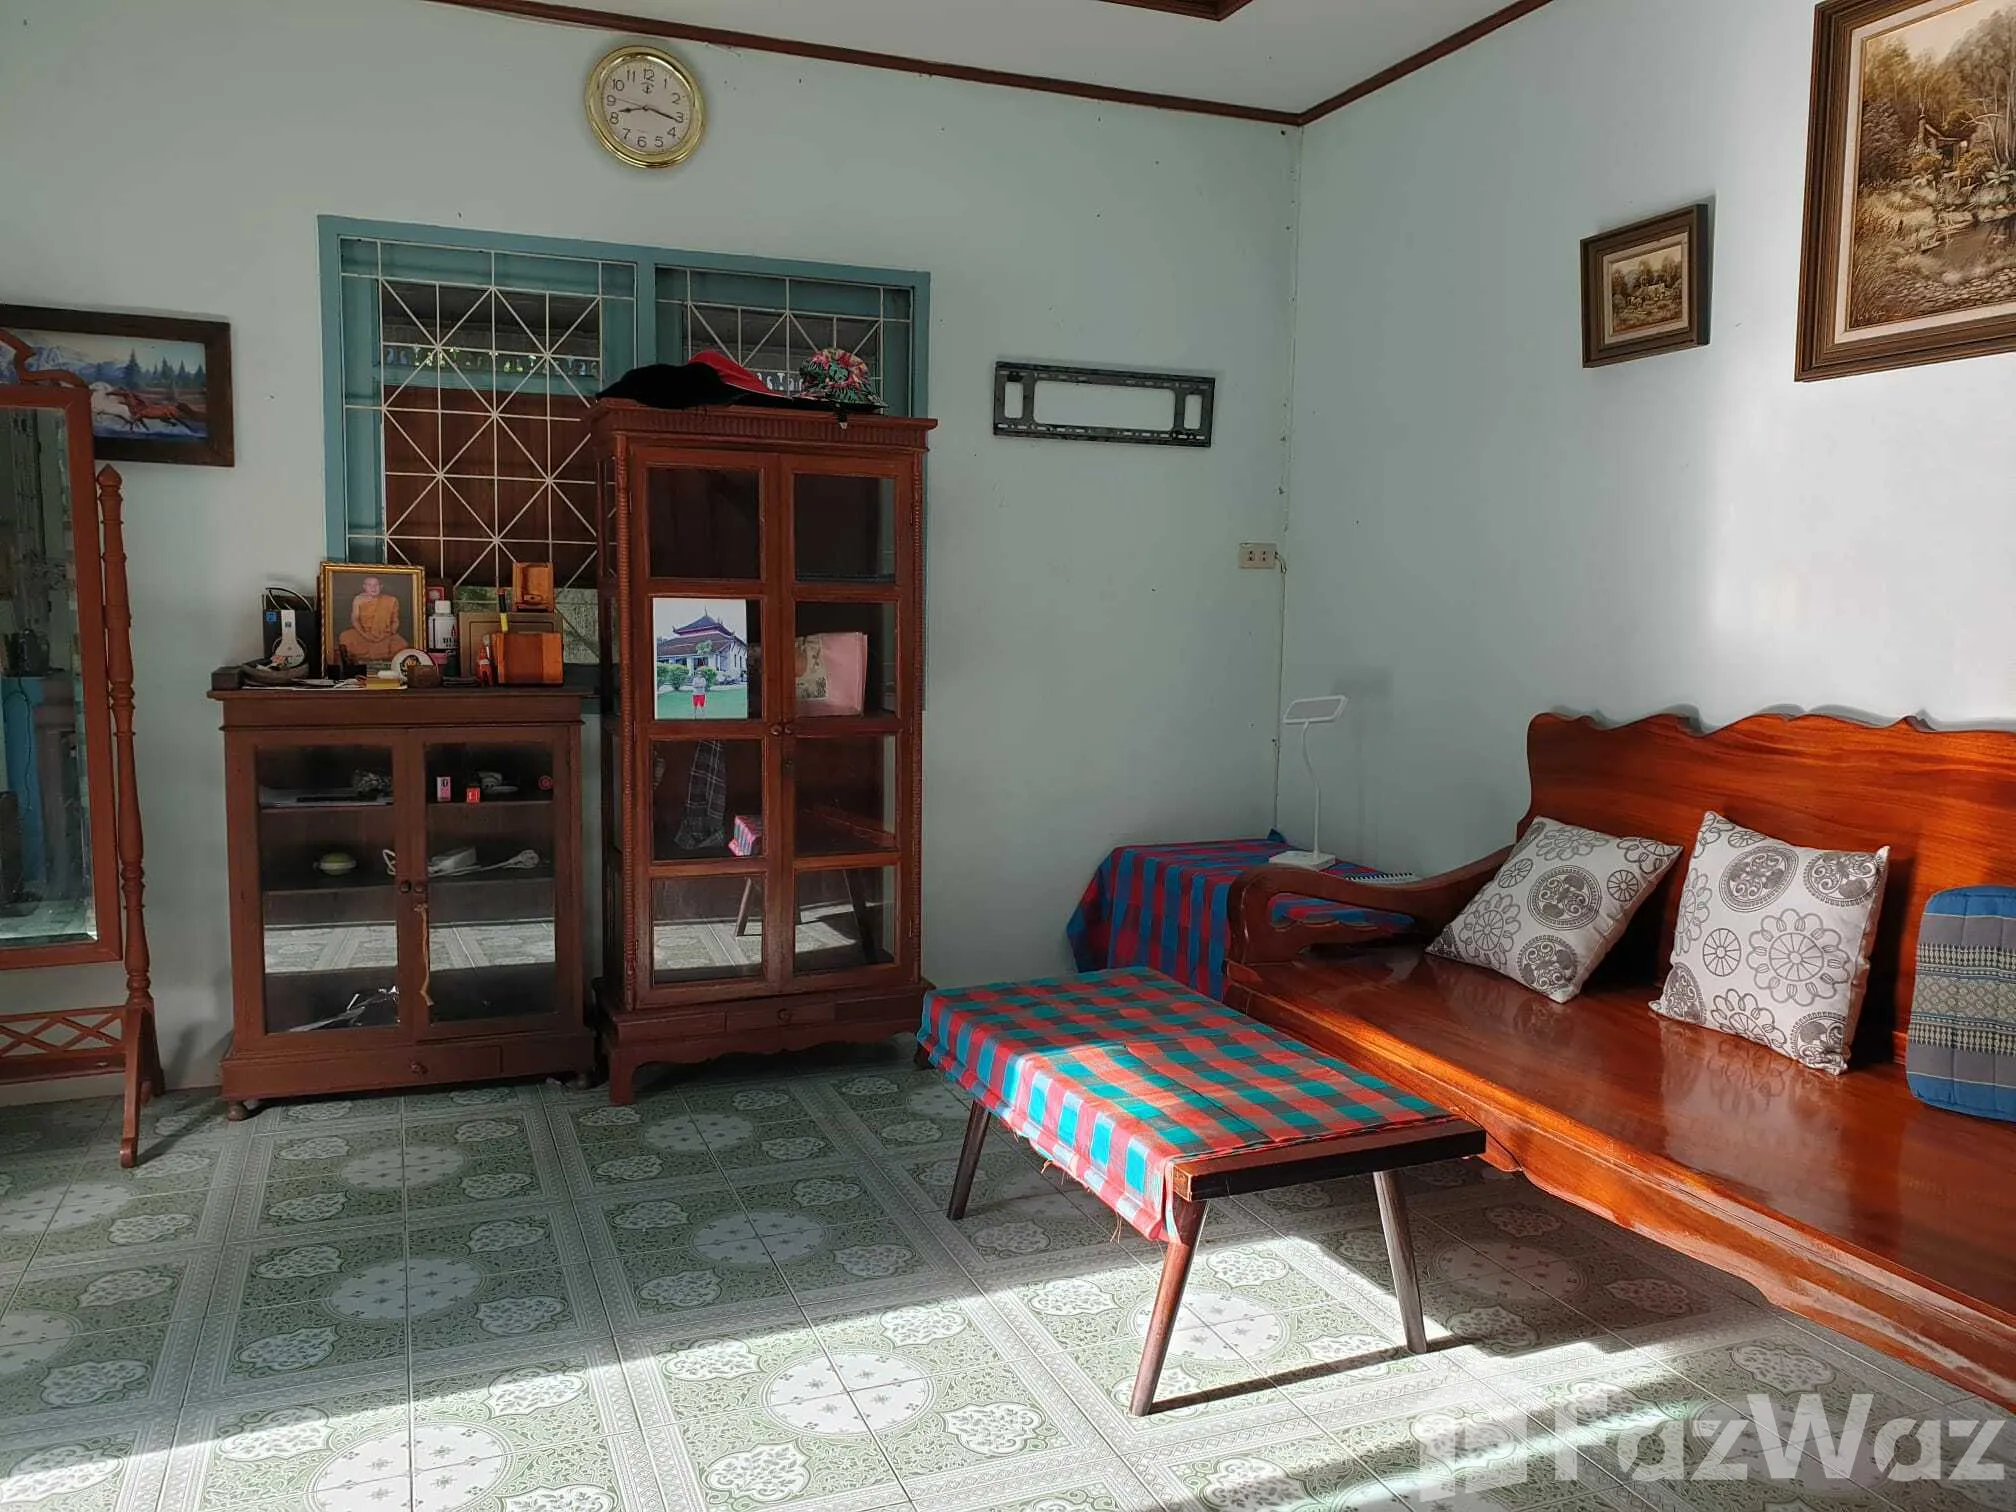 3 Bedroom House for Rent in Karon, Phuket for ฿30,000/mo | U1146564